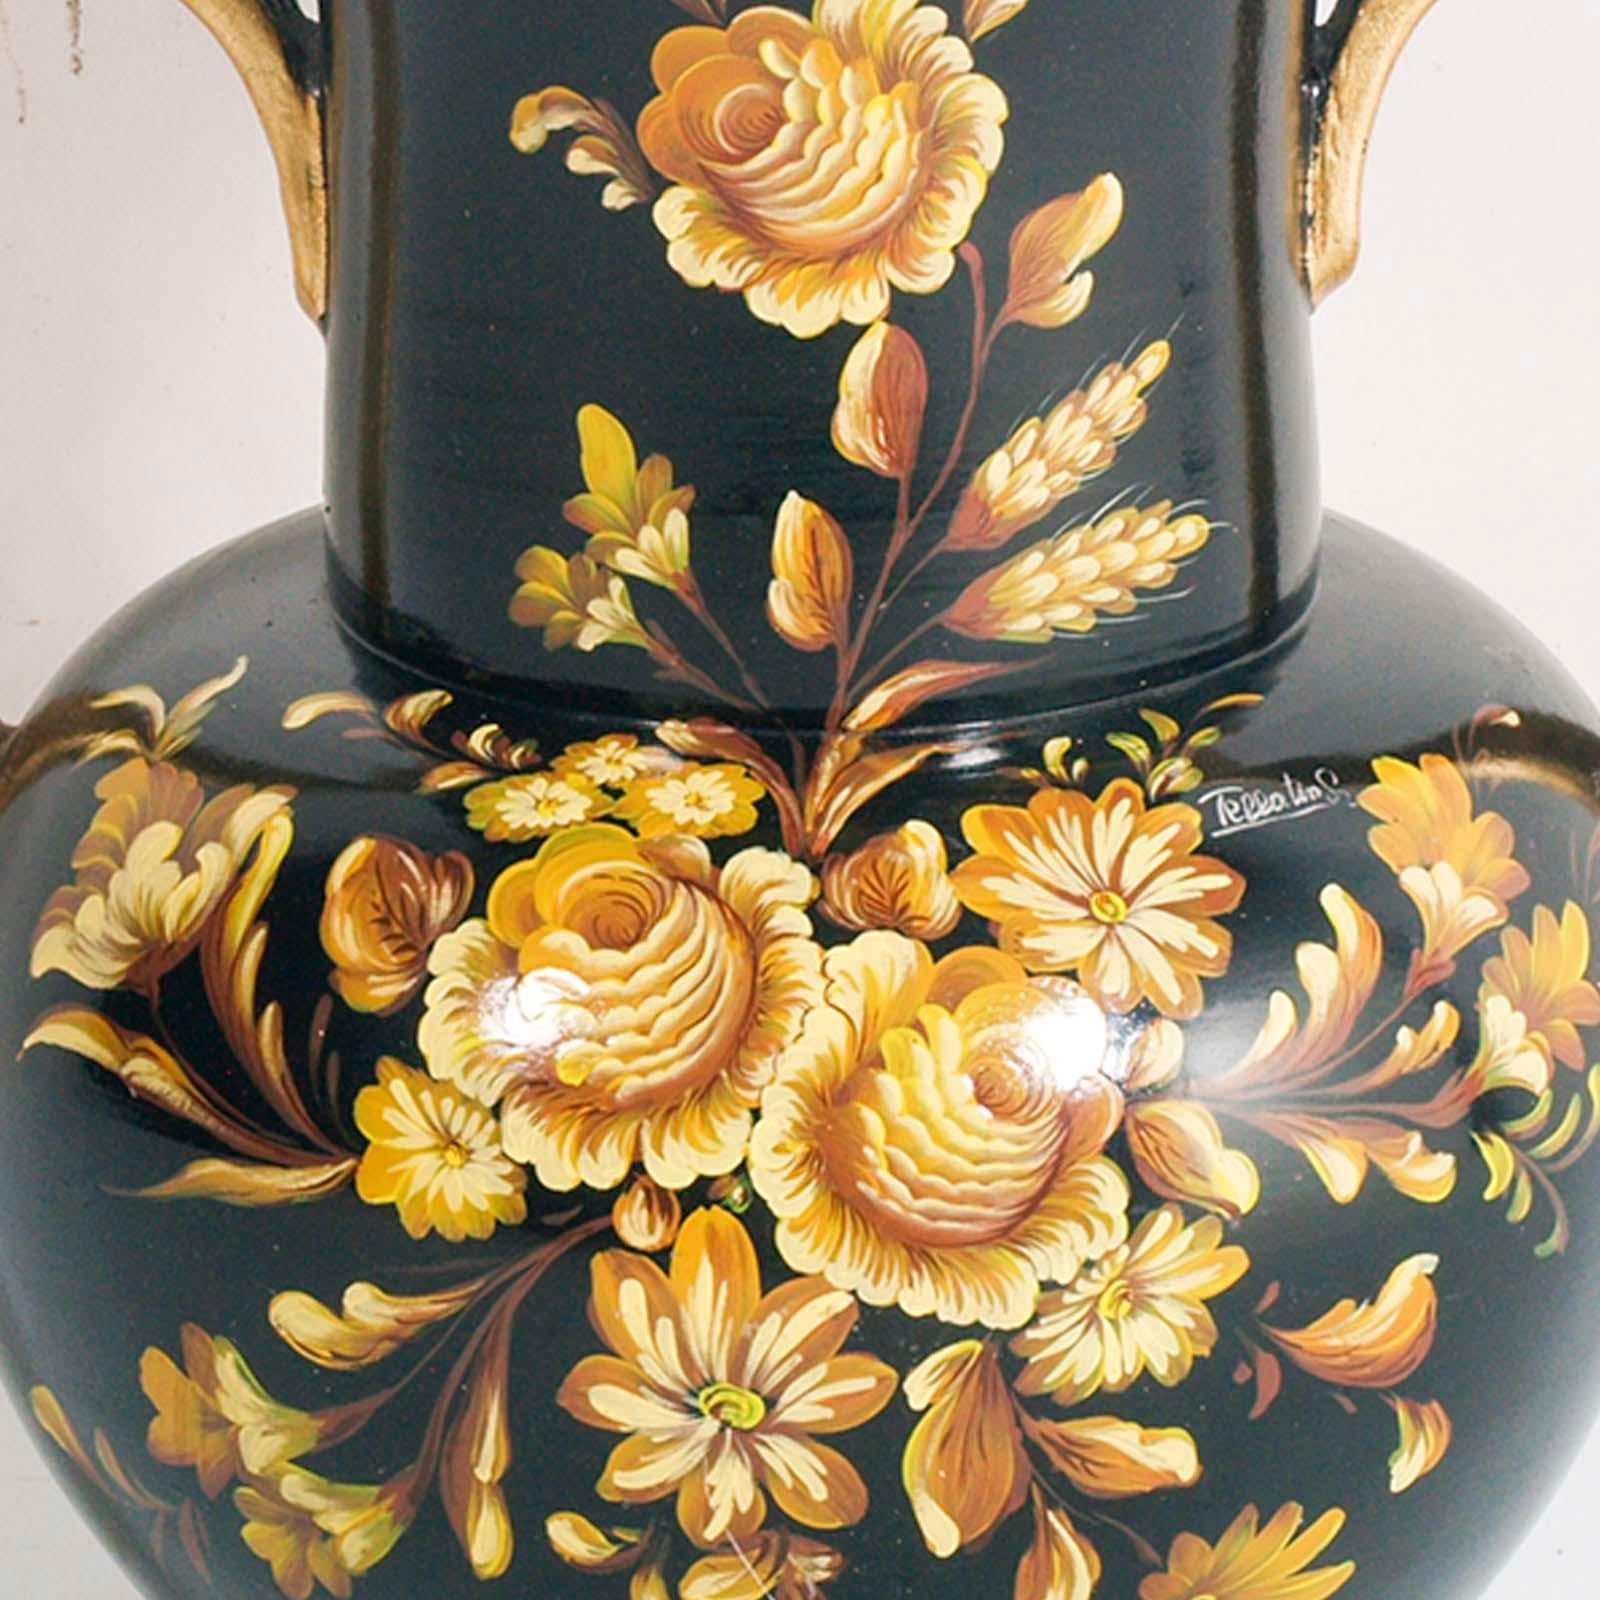 Antique 1848 signed large neoclassical terracotta vase hand decorated by Tellatin, Nove di Bassano, mid-20th century
Large amphora from 1848 with a pair of sinuous and wavy handles. The vase is decorated in the round with a black background and a